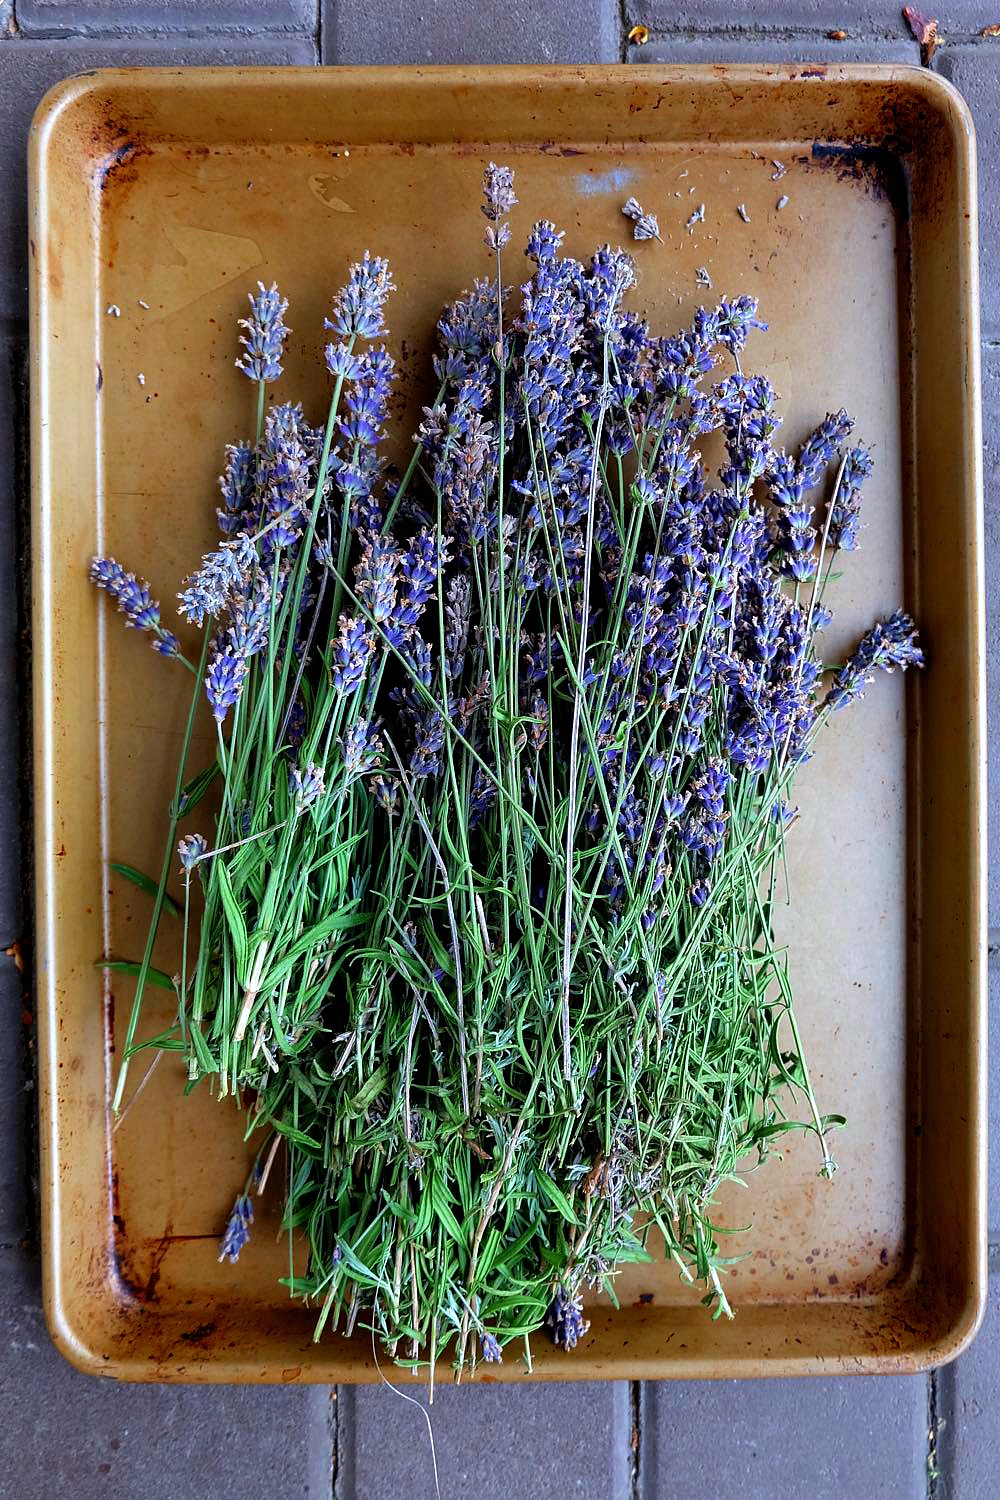 Who knew it was so easy? Learn to make DIY Lavender Essential Oil Tincture at home! The first post in Hello Creative Family's Think Ahead Handmade Gift Ideas Series! This lovely lavender extract can be used in a variety of lavender recipes and DIY projects! Simple to make and makes a lovely gift!